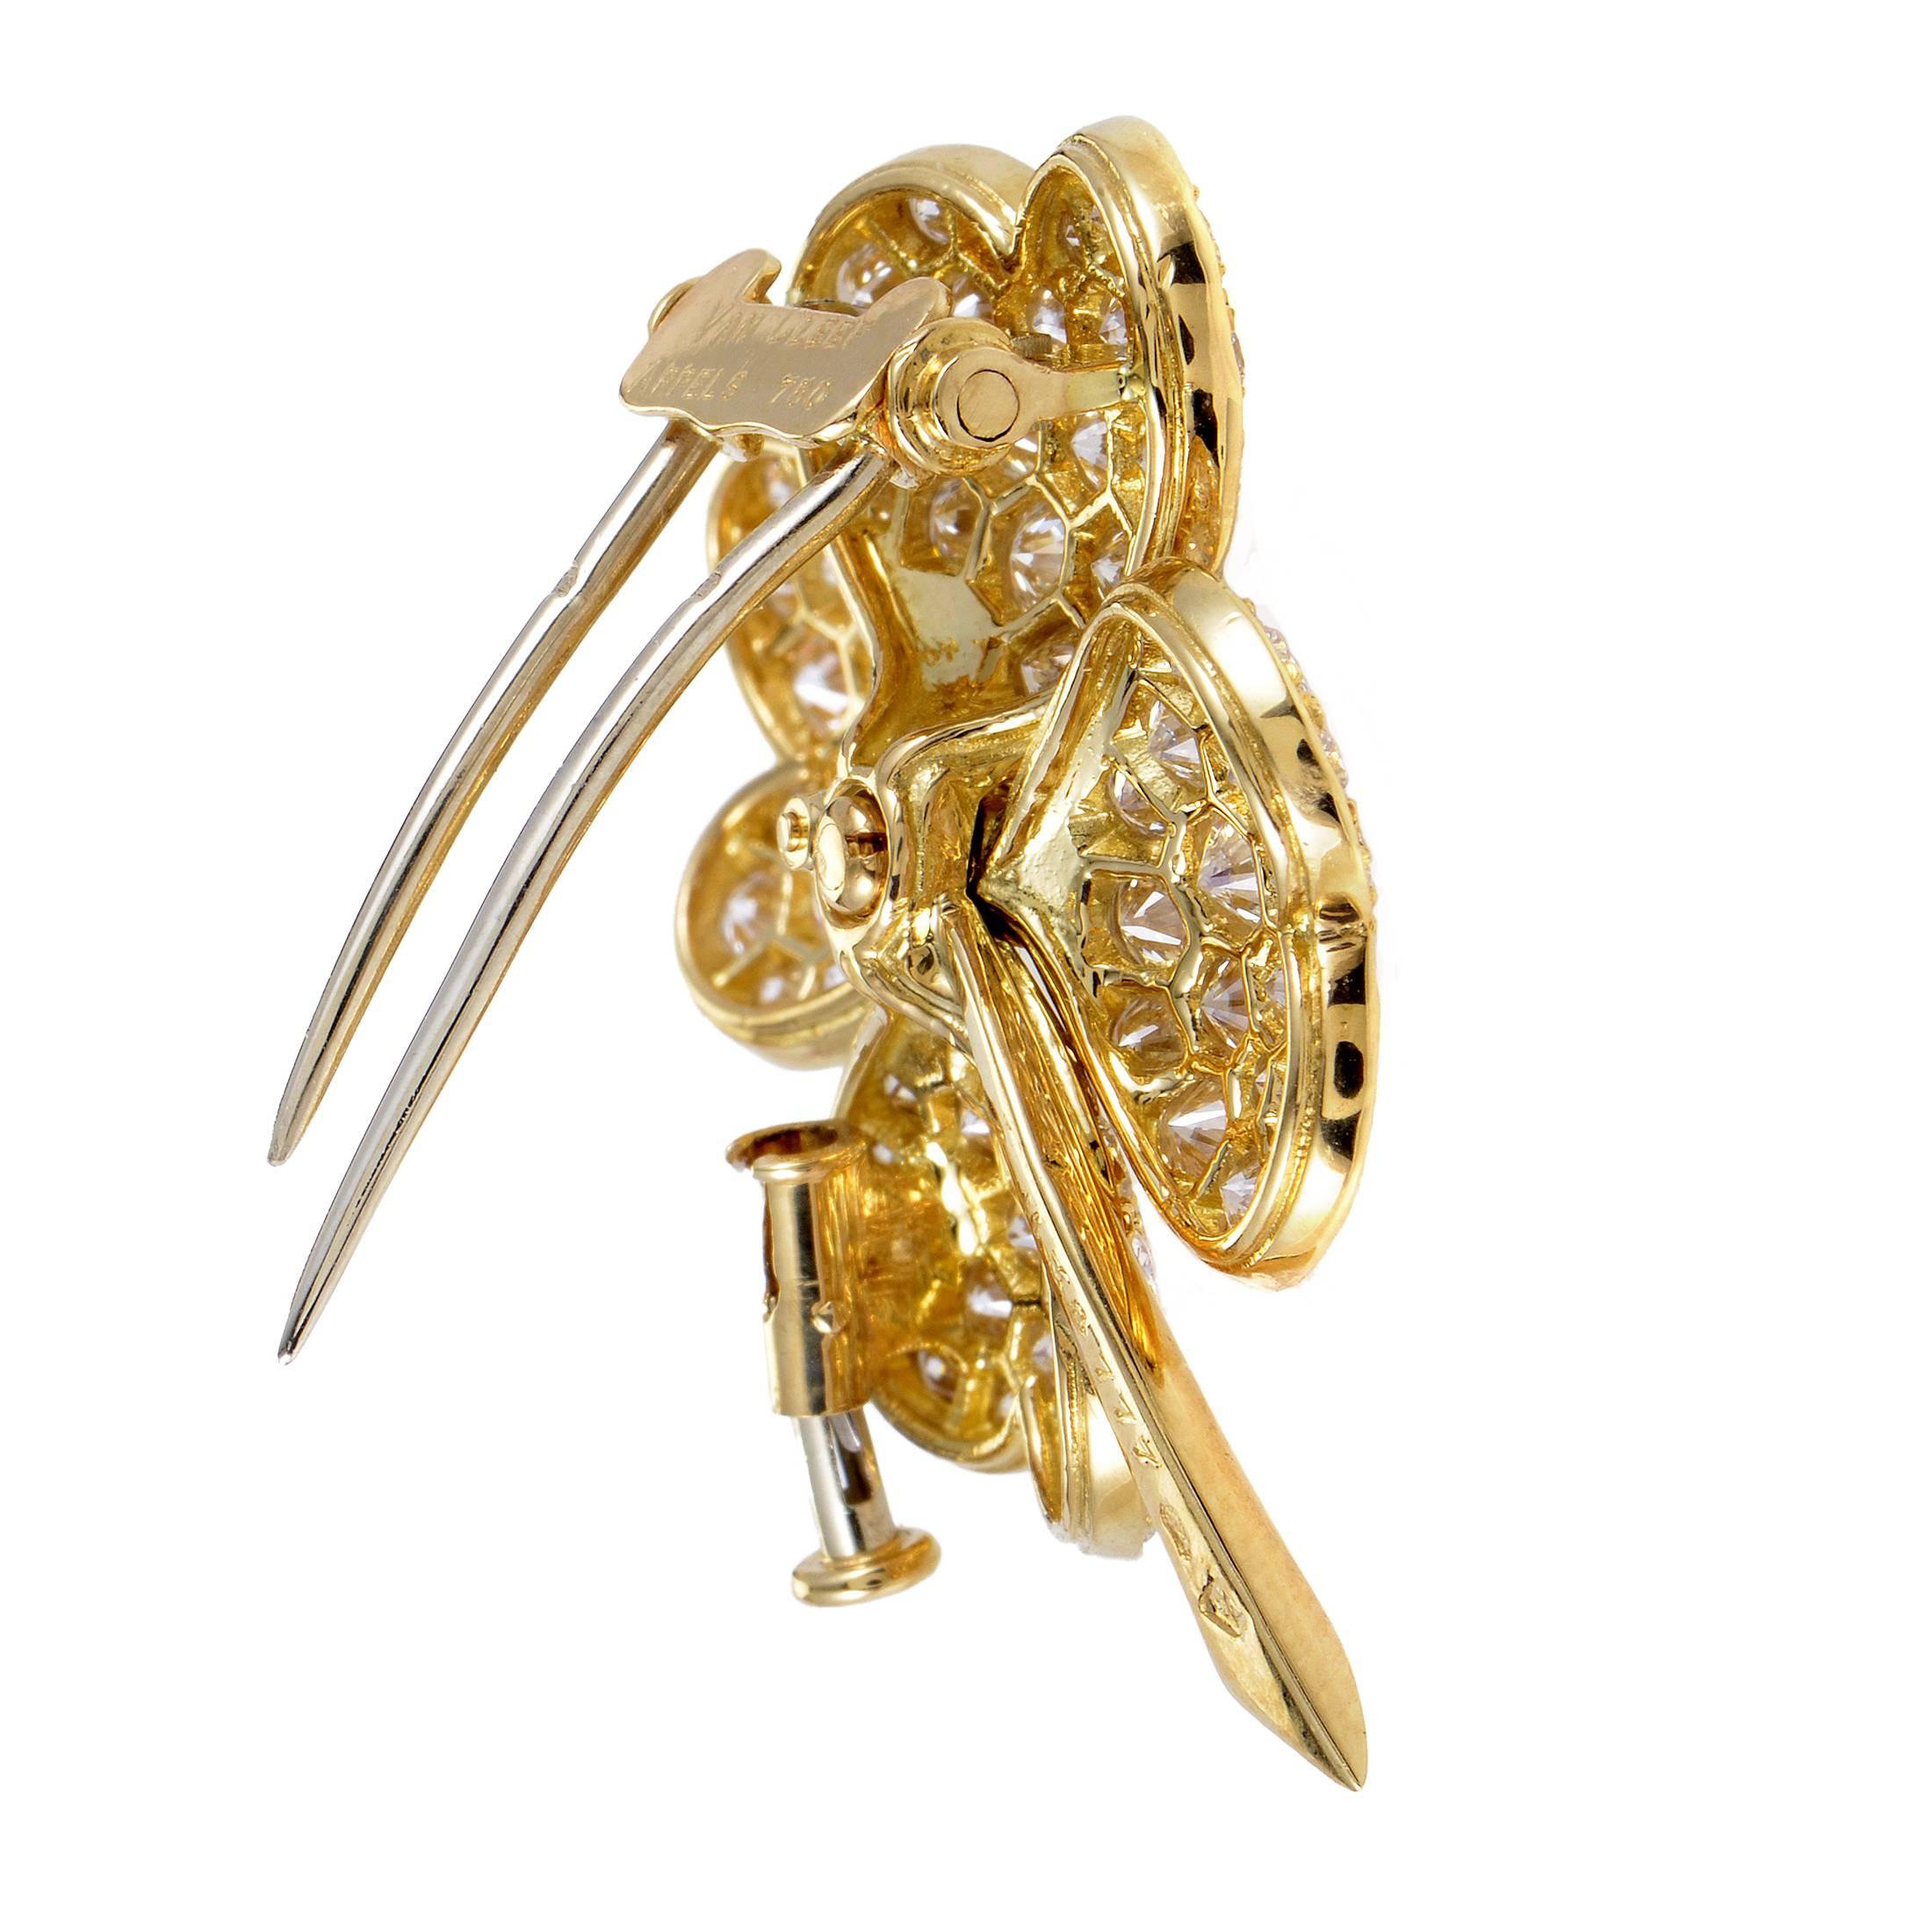 A truly breath-taking interpretation of an adorable symbol believed to bring good luck to the wearer, this scintillating four-leaf clover brooch from the Cosmos collection by Van Cleef & Arpels is made of radiant 18K yellow gold with a stunning